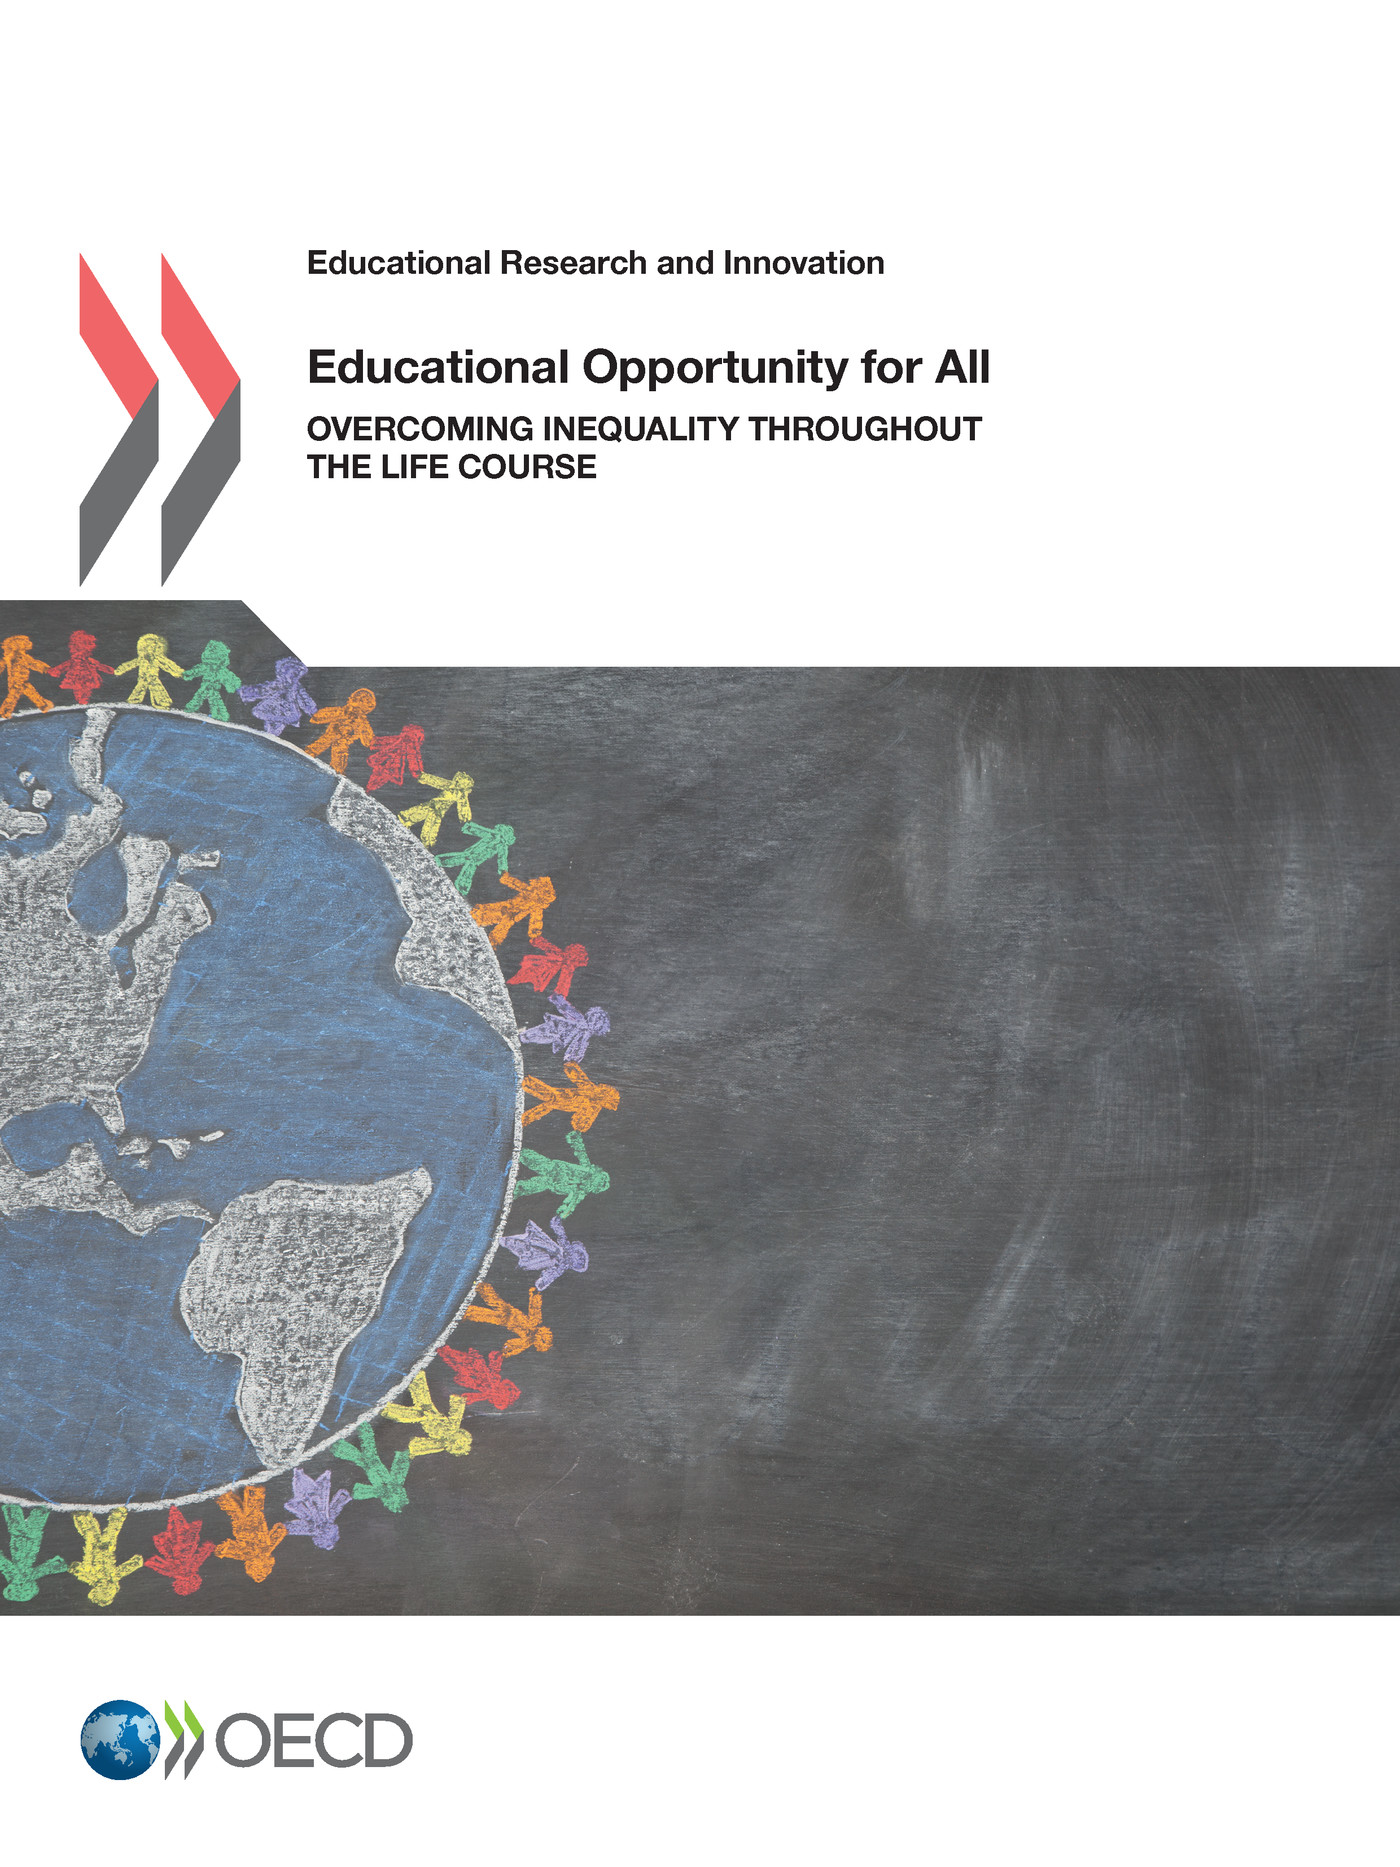 Educational Opportunity for All -  Collectif - OCDE / OECD